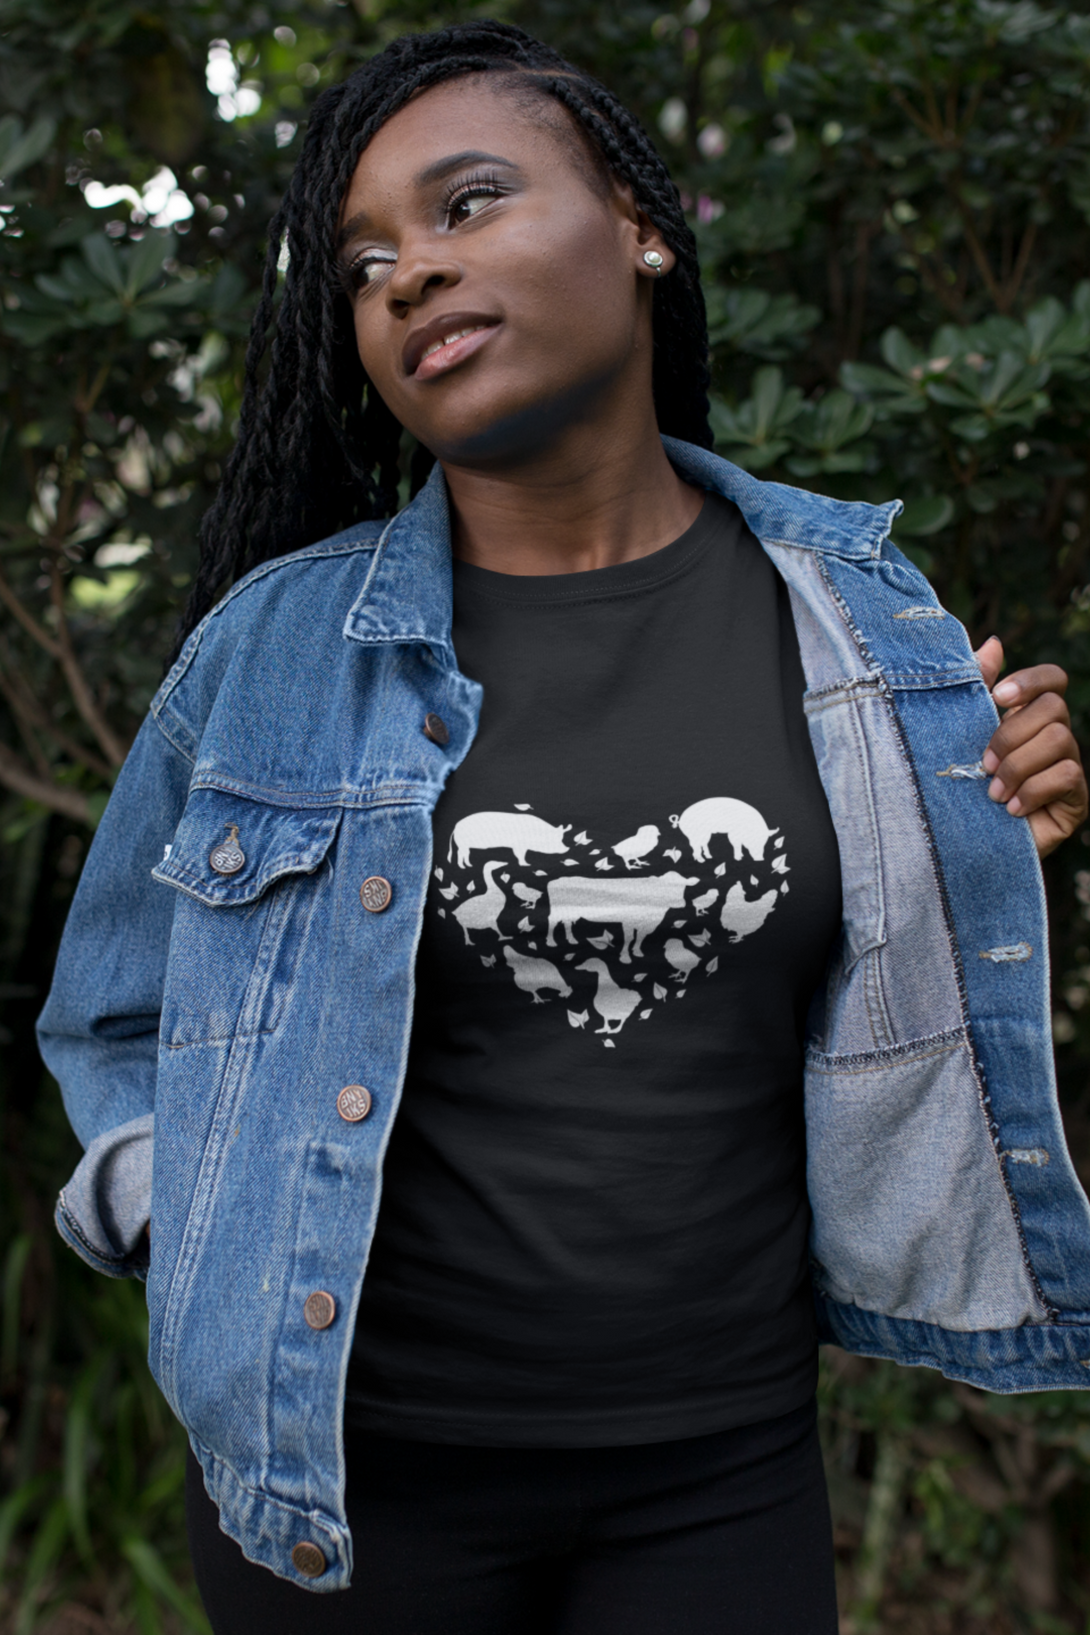 Farm Animals In My Heart Printed T-Shirt For Women - WowWaves - 5